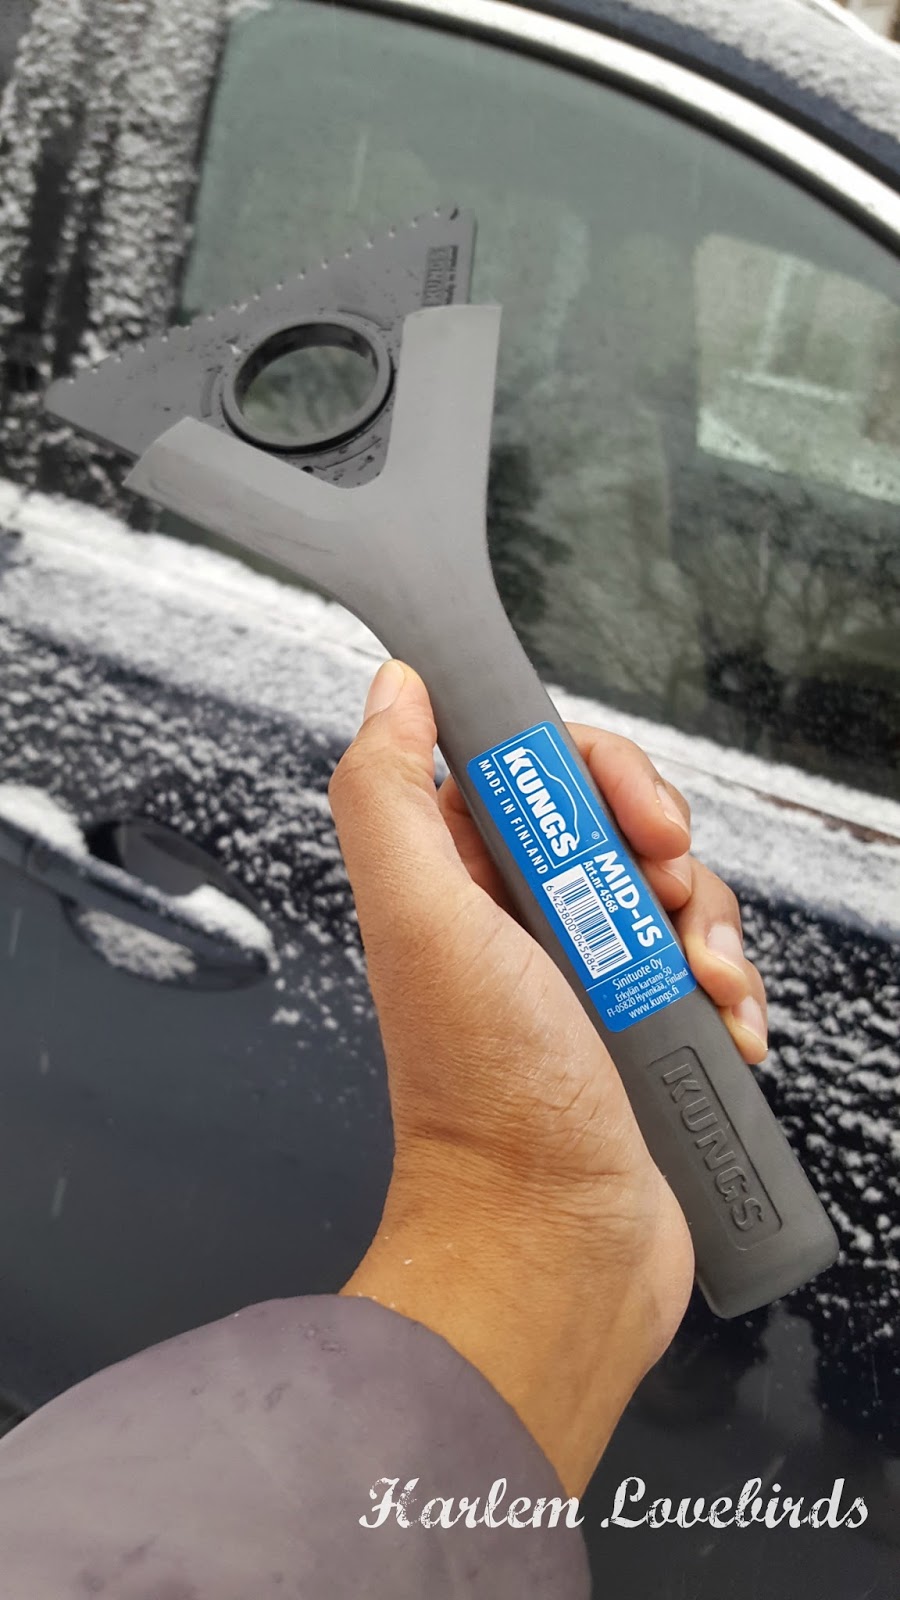 Kungs Mid-is ice scraper - made in Finland